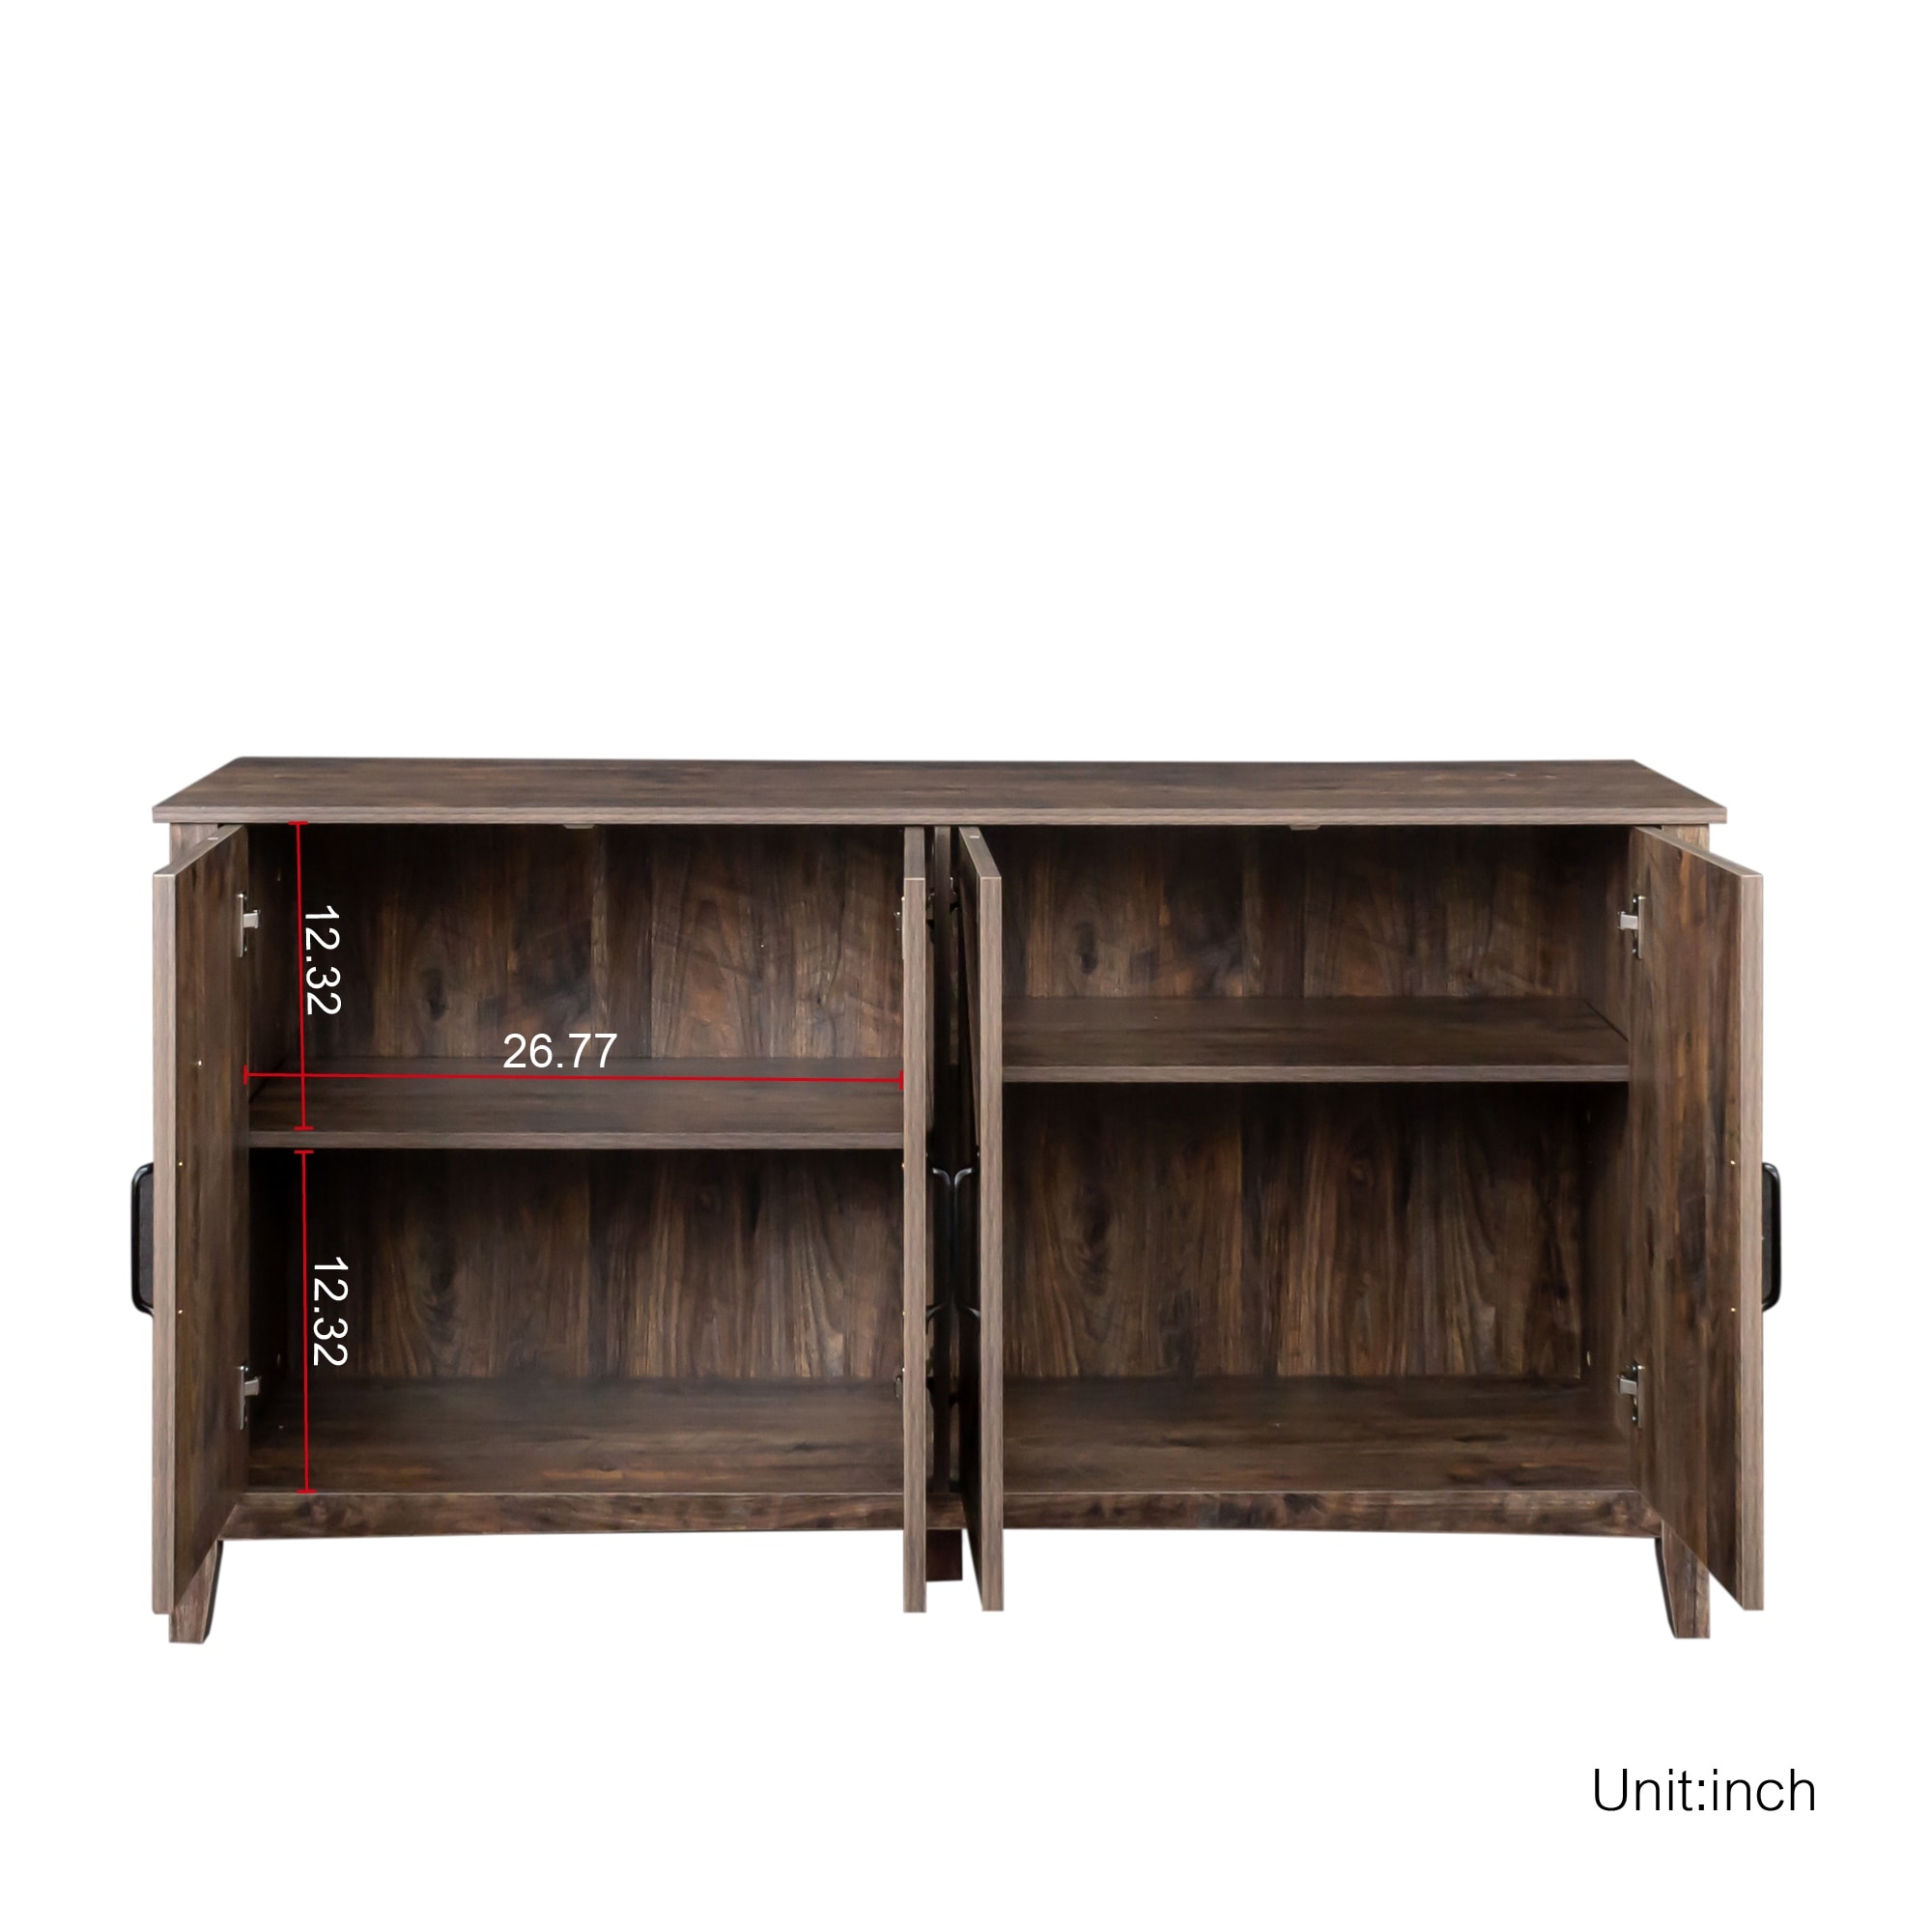 Cabinet with 4 Doors and 4 open shelgves for Living Room Office Bedroom -  Bed Bath & Beyond - 38168747